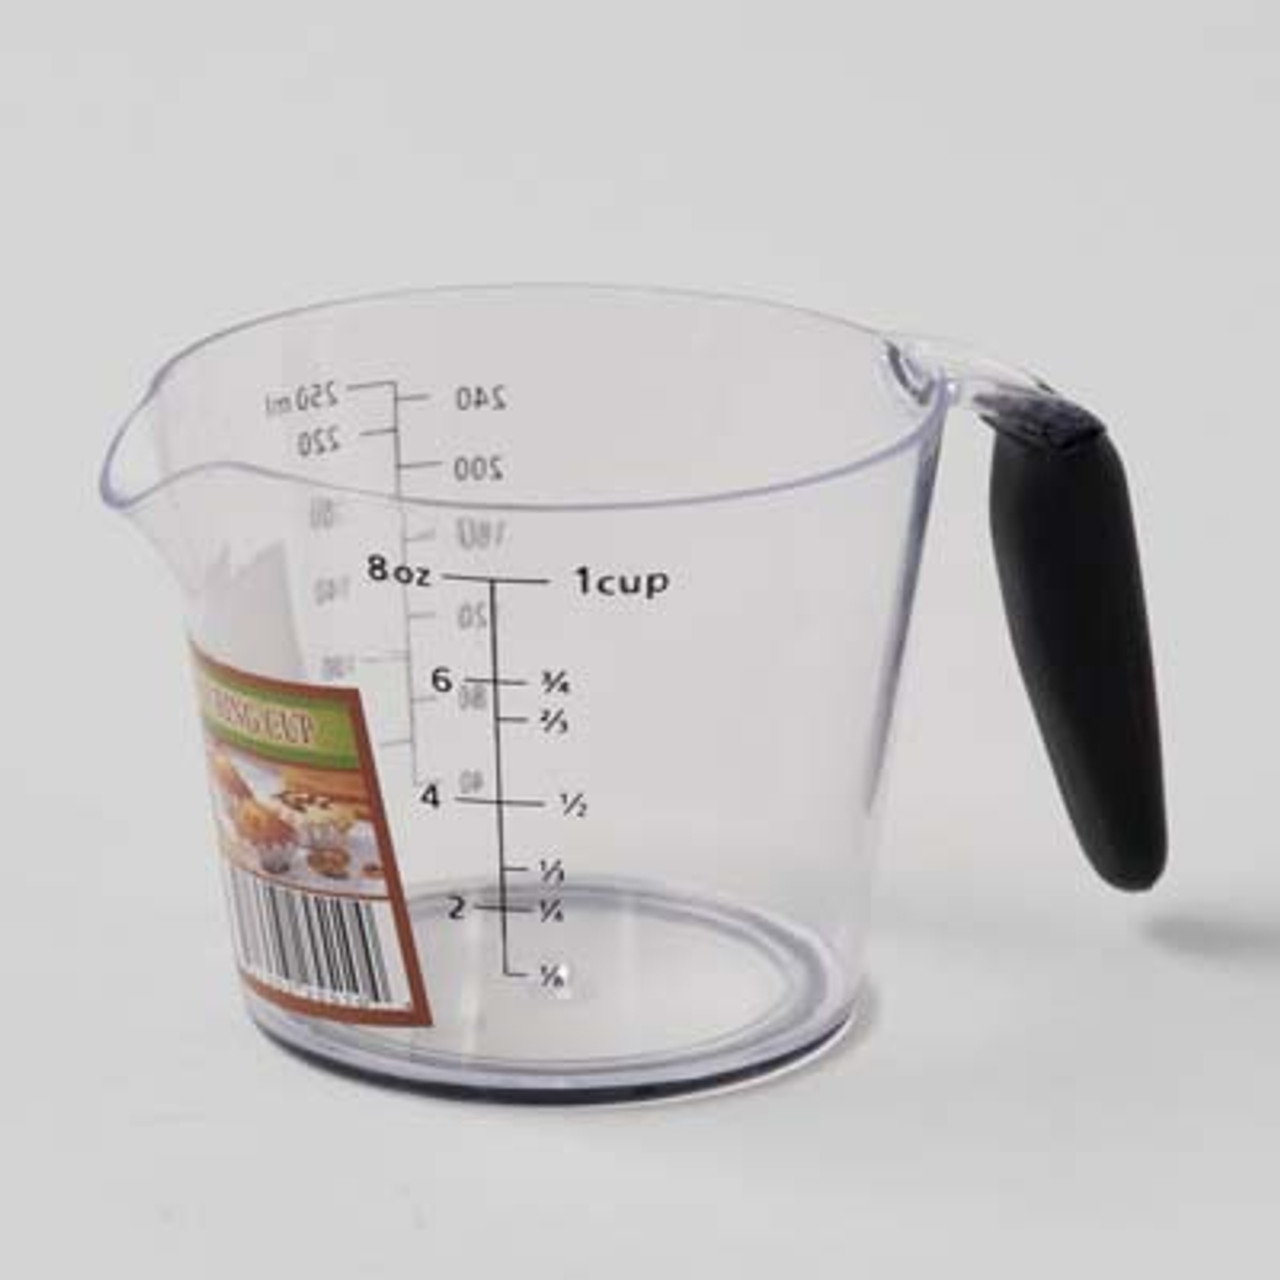 MEASURING CUP PLASTIC ONE CUP SOFTGRIP HANDLE B&C LABEL - Regent Products  Corp.